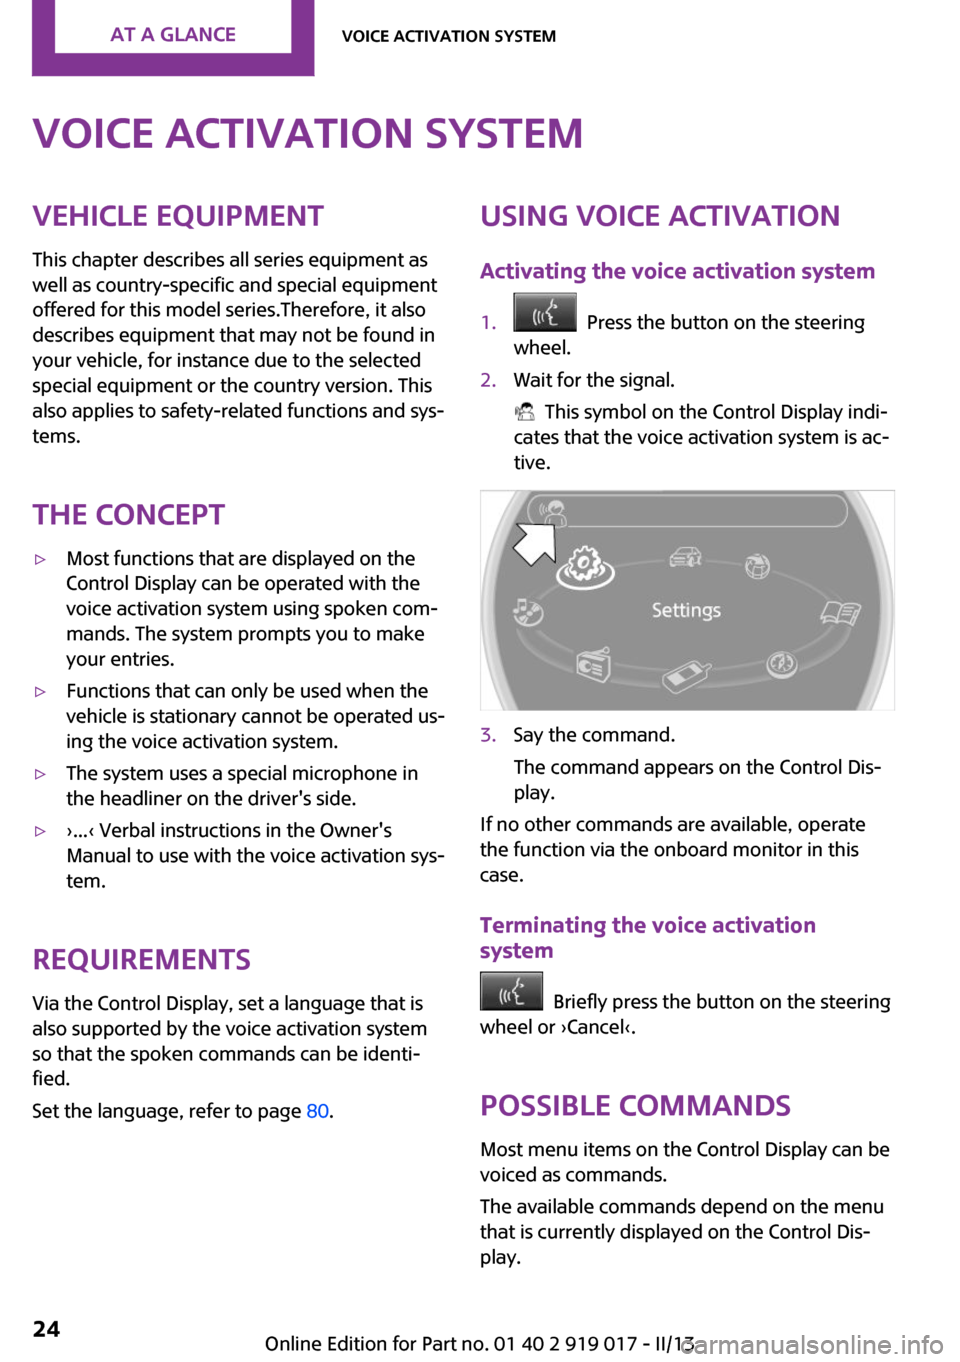 MINI Roadster 2013 Owners Guide Voice activation systemVehicle equipment
This chapter describes all series equipment as
well as country-specific and special equipment
offered for this model series.Therefore, it also
describes equipm